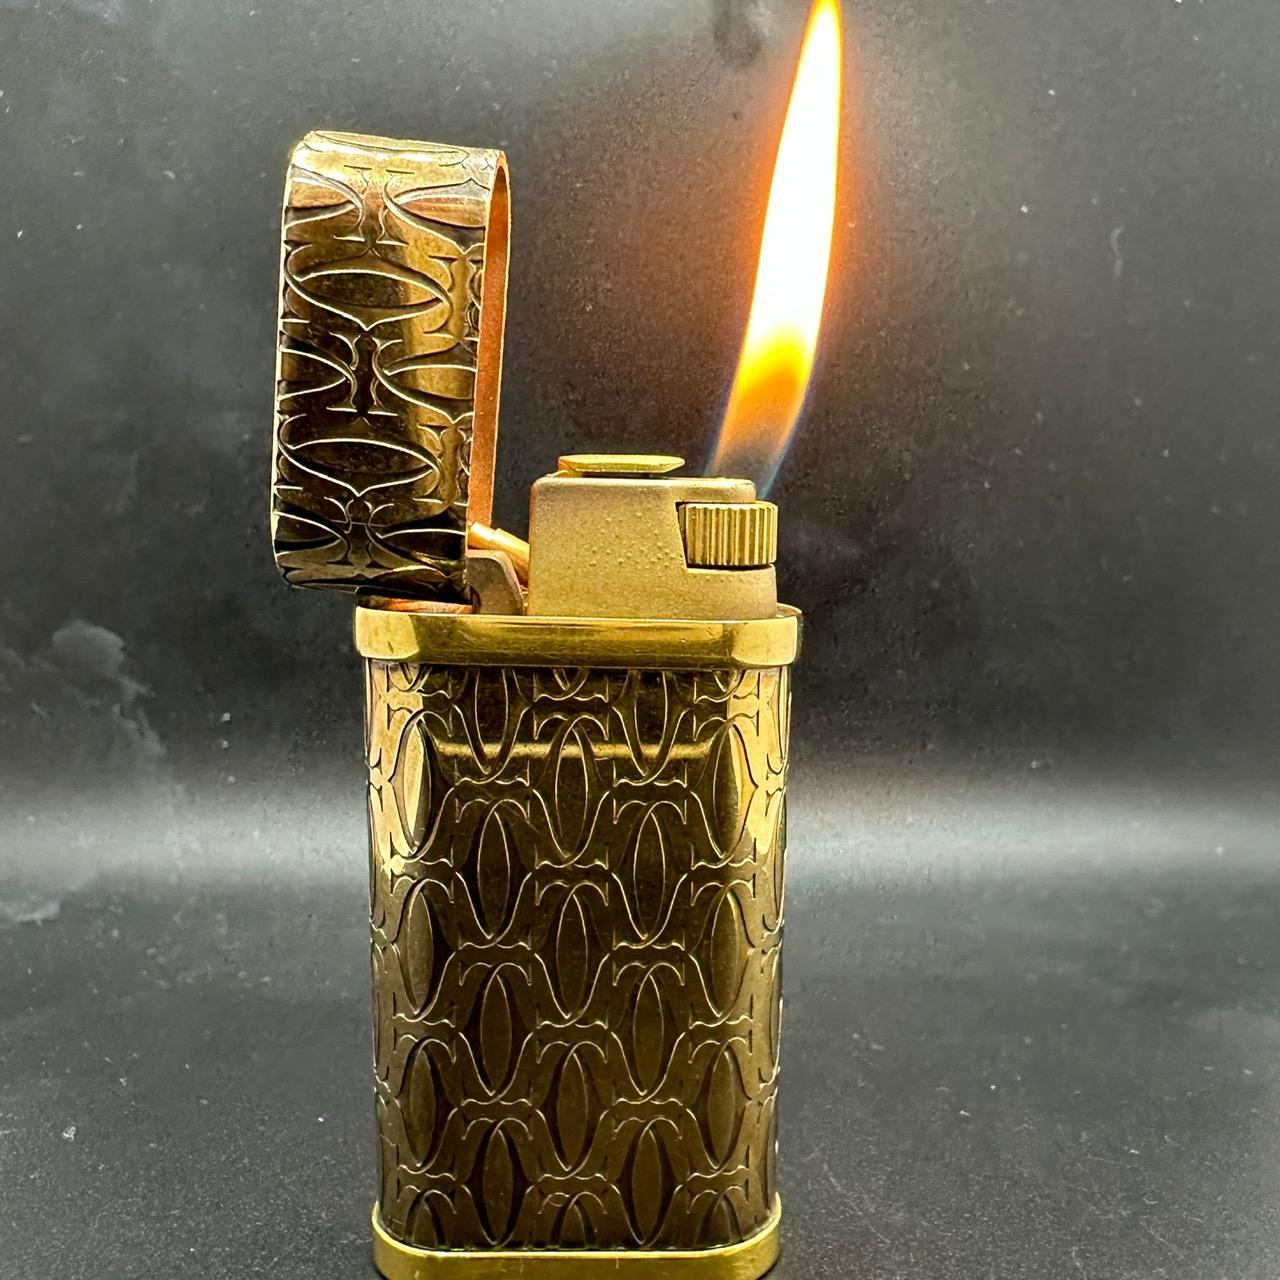 Le must de Cartier logo gold lighter 
Very rare 
Cartier Lighter Gold plated 18k Gold  
Comes with original Cartier case
In mint exterior and working condition  
Circa 2000
The lighter ignites, sparks and flames